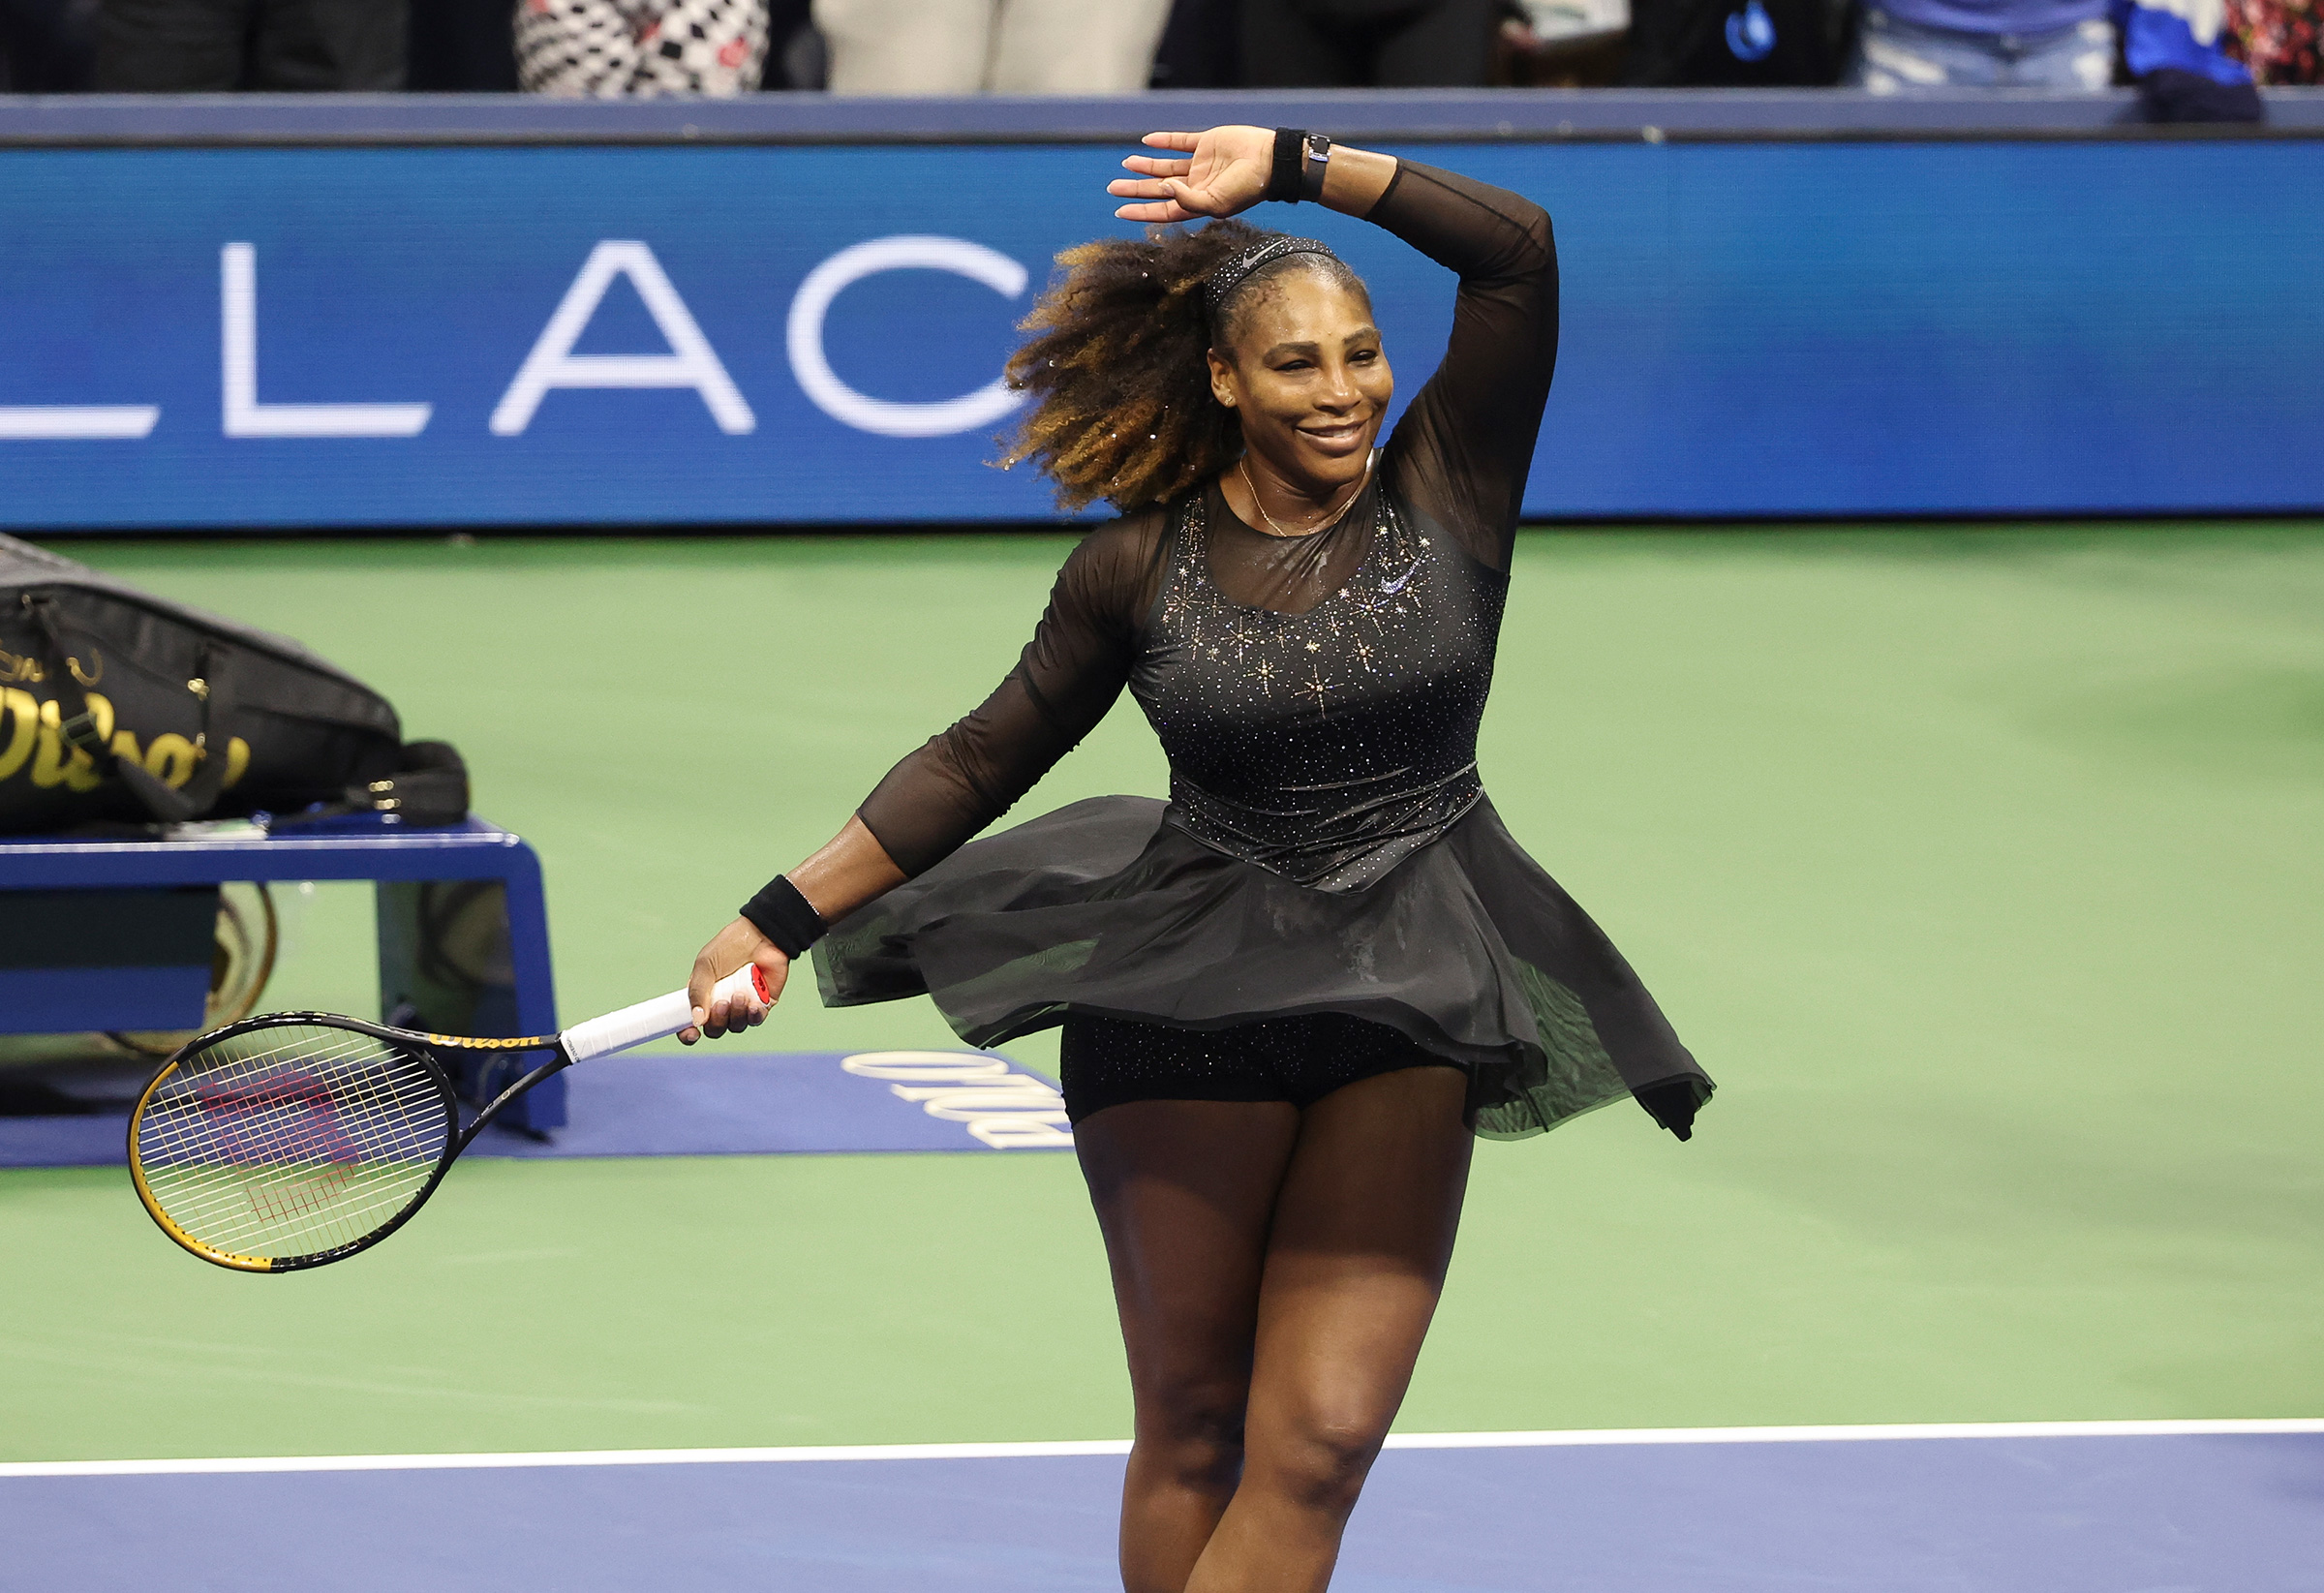 Serena Williams US Open Outfit Symbolism Explained | Time